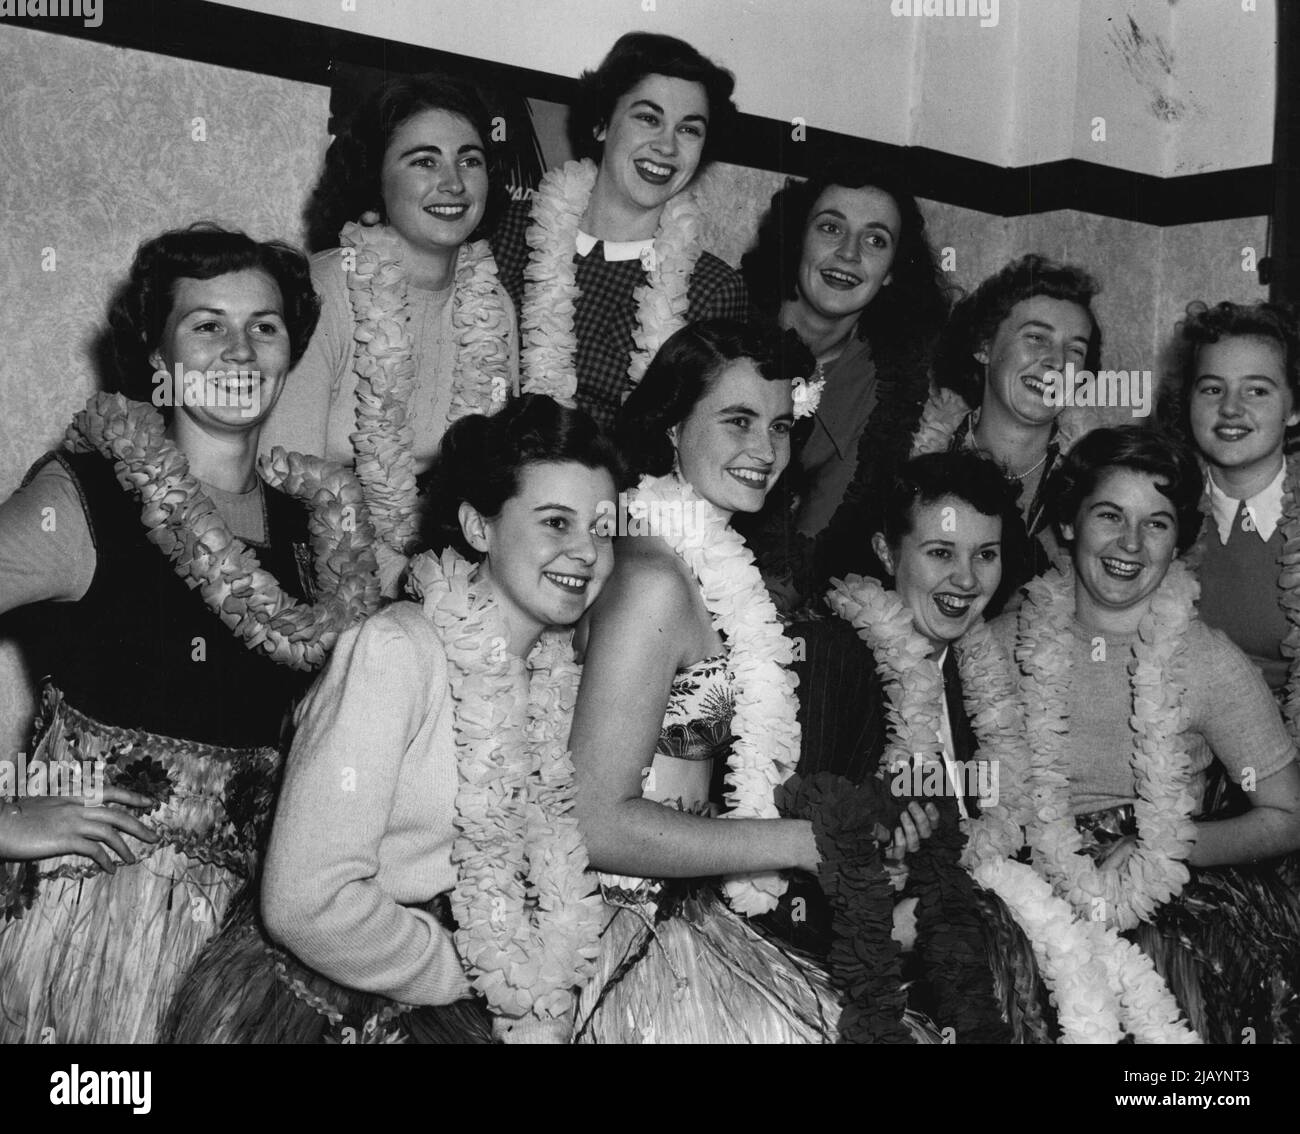 Misc. - Leis. May 30, 1950. Stock Photo